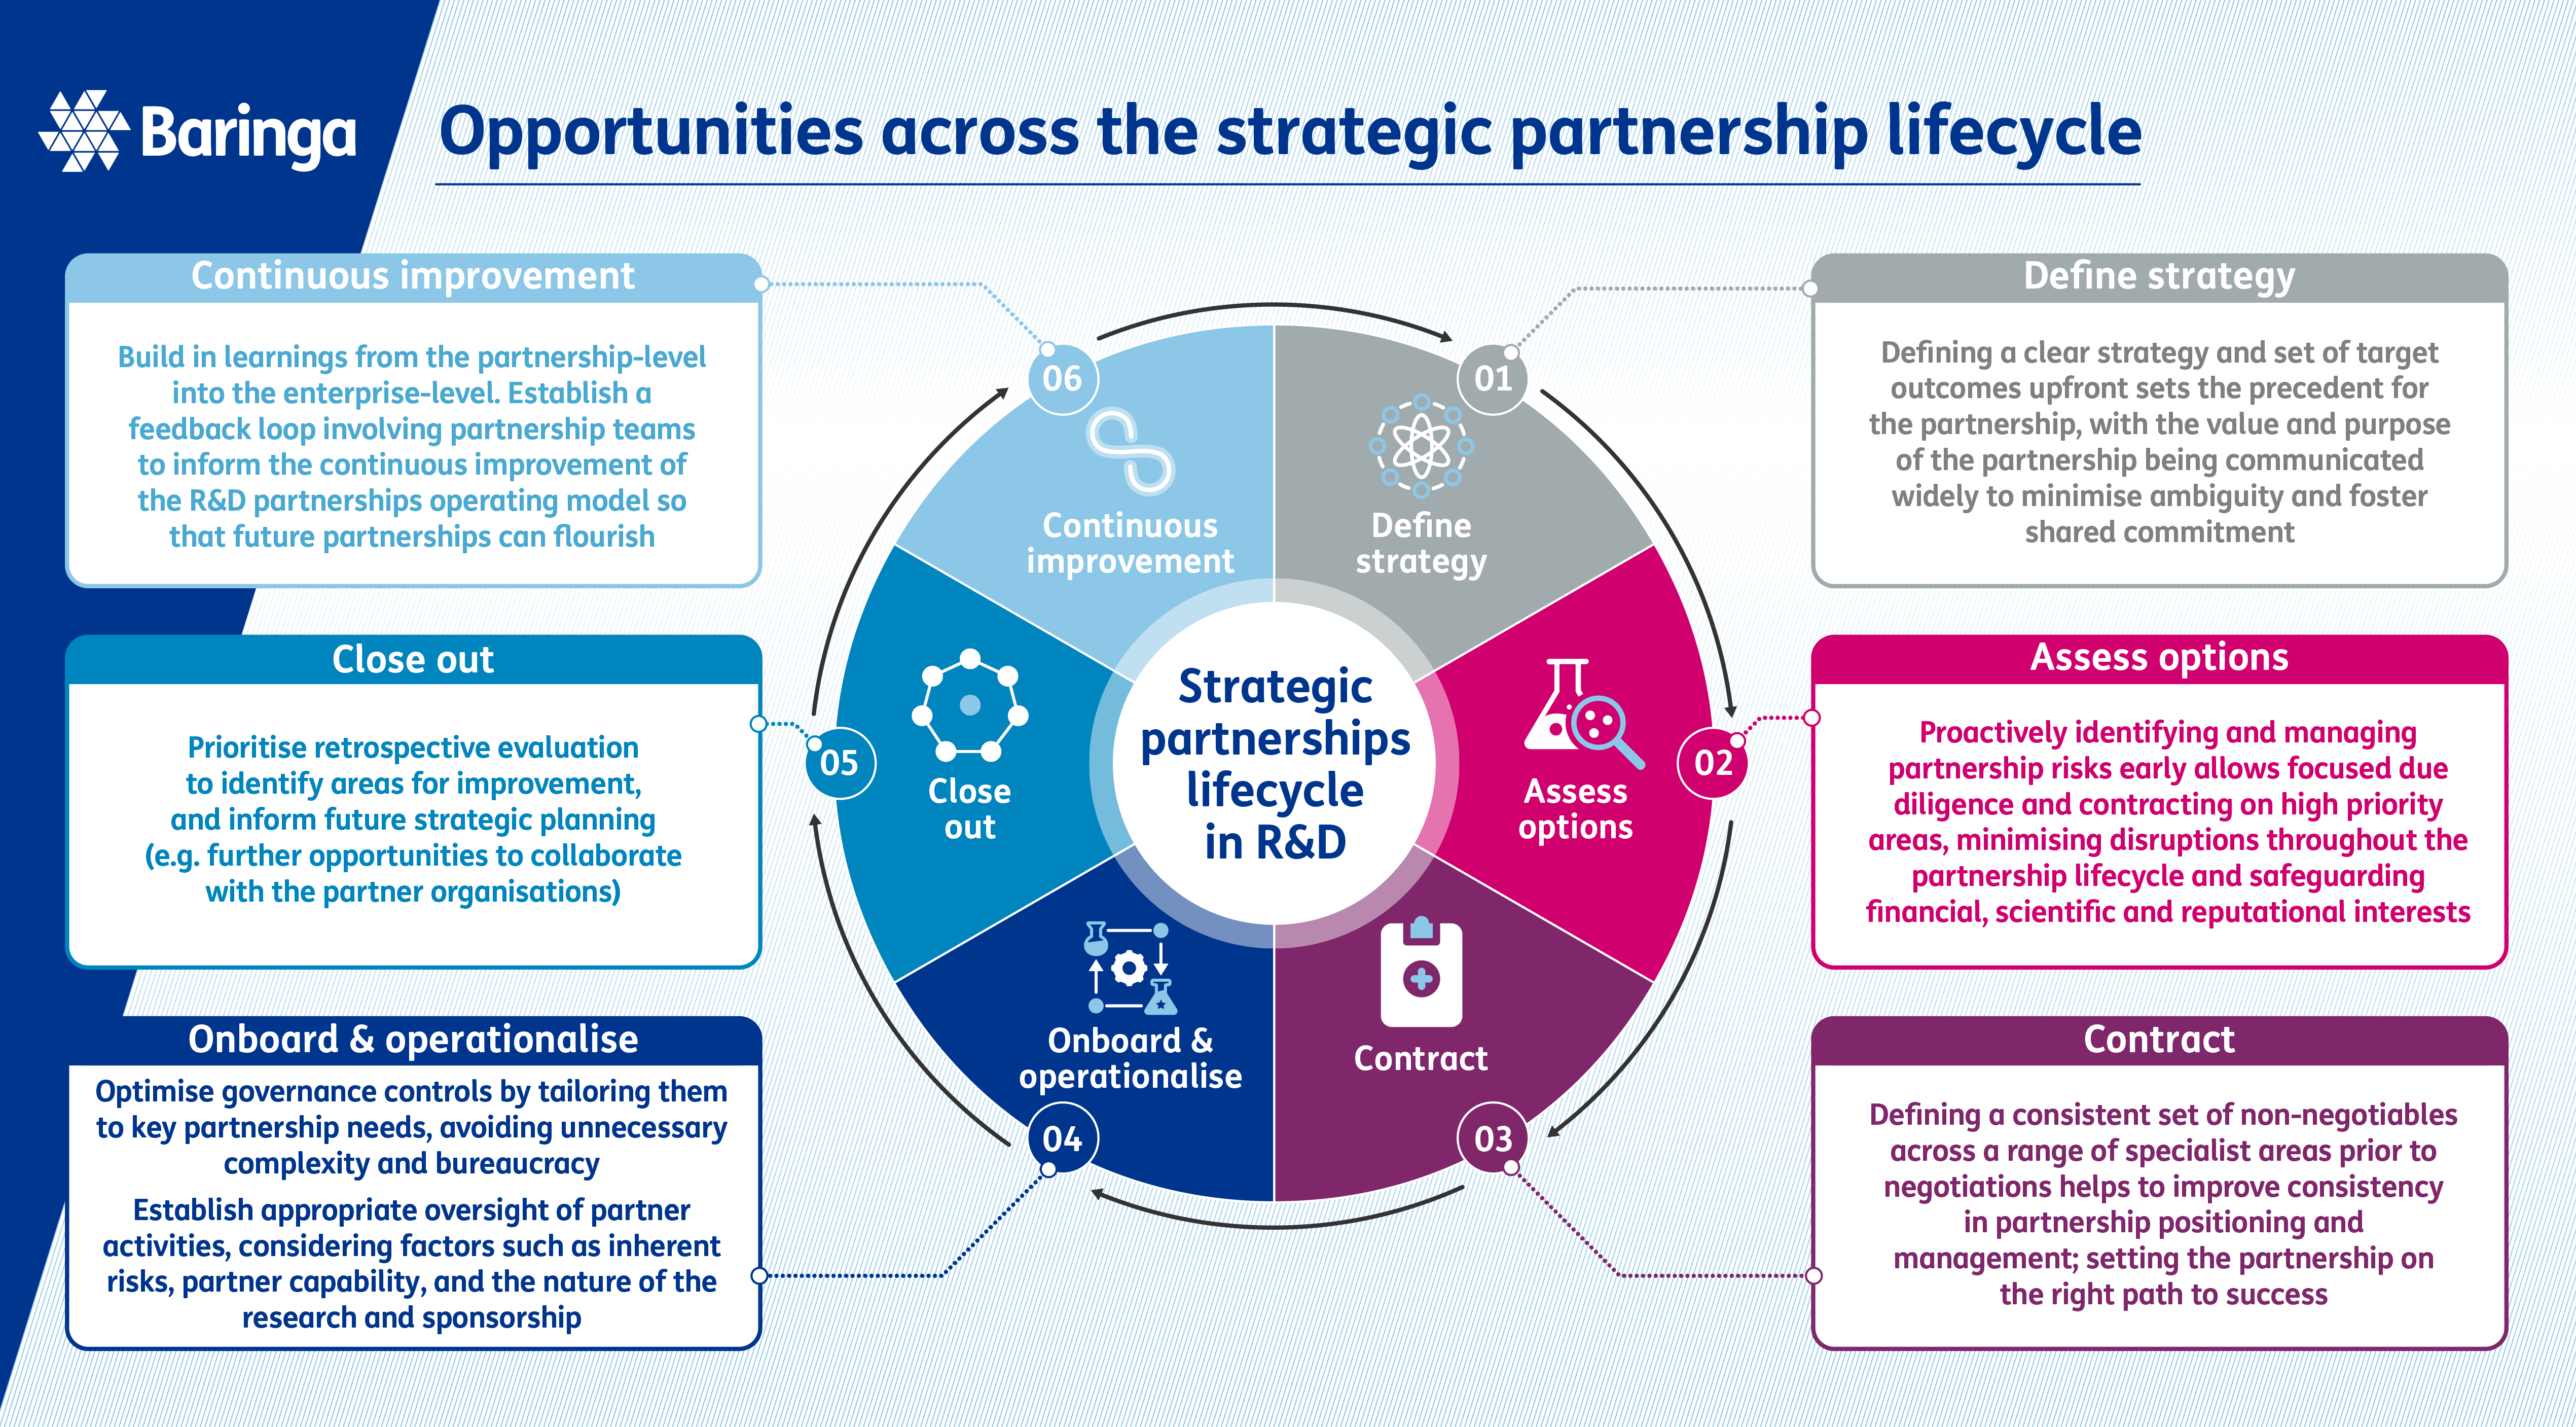 Infographic - Opportunities across the strategic partnership lifecycle